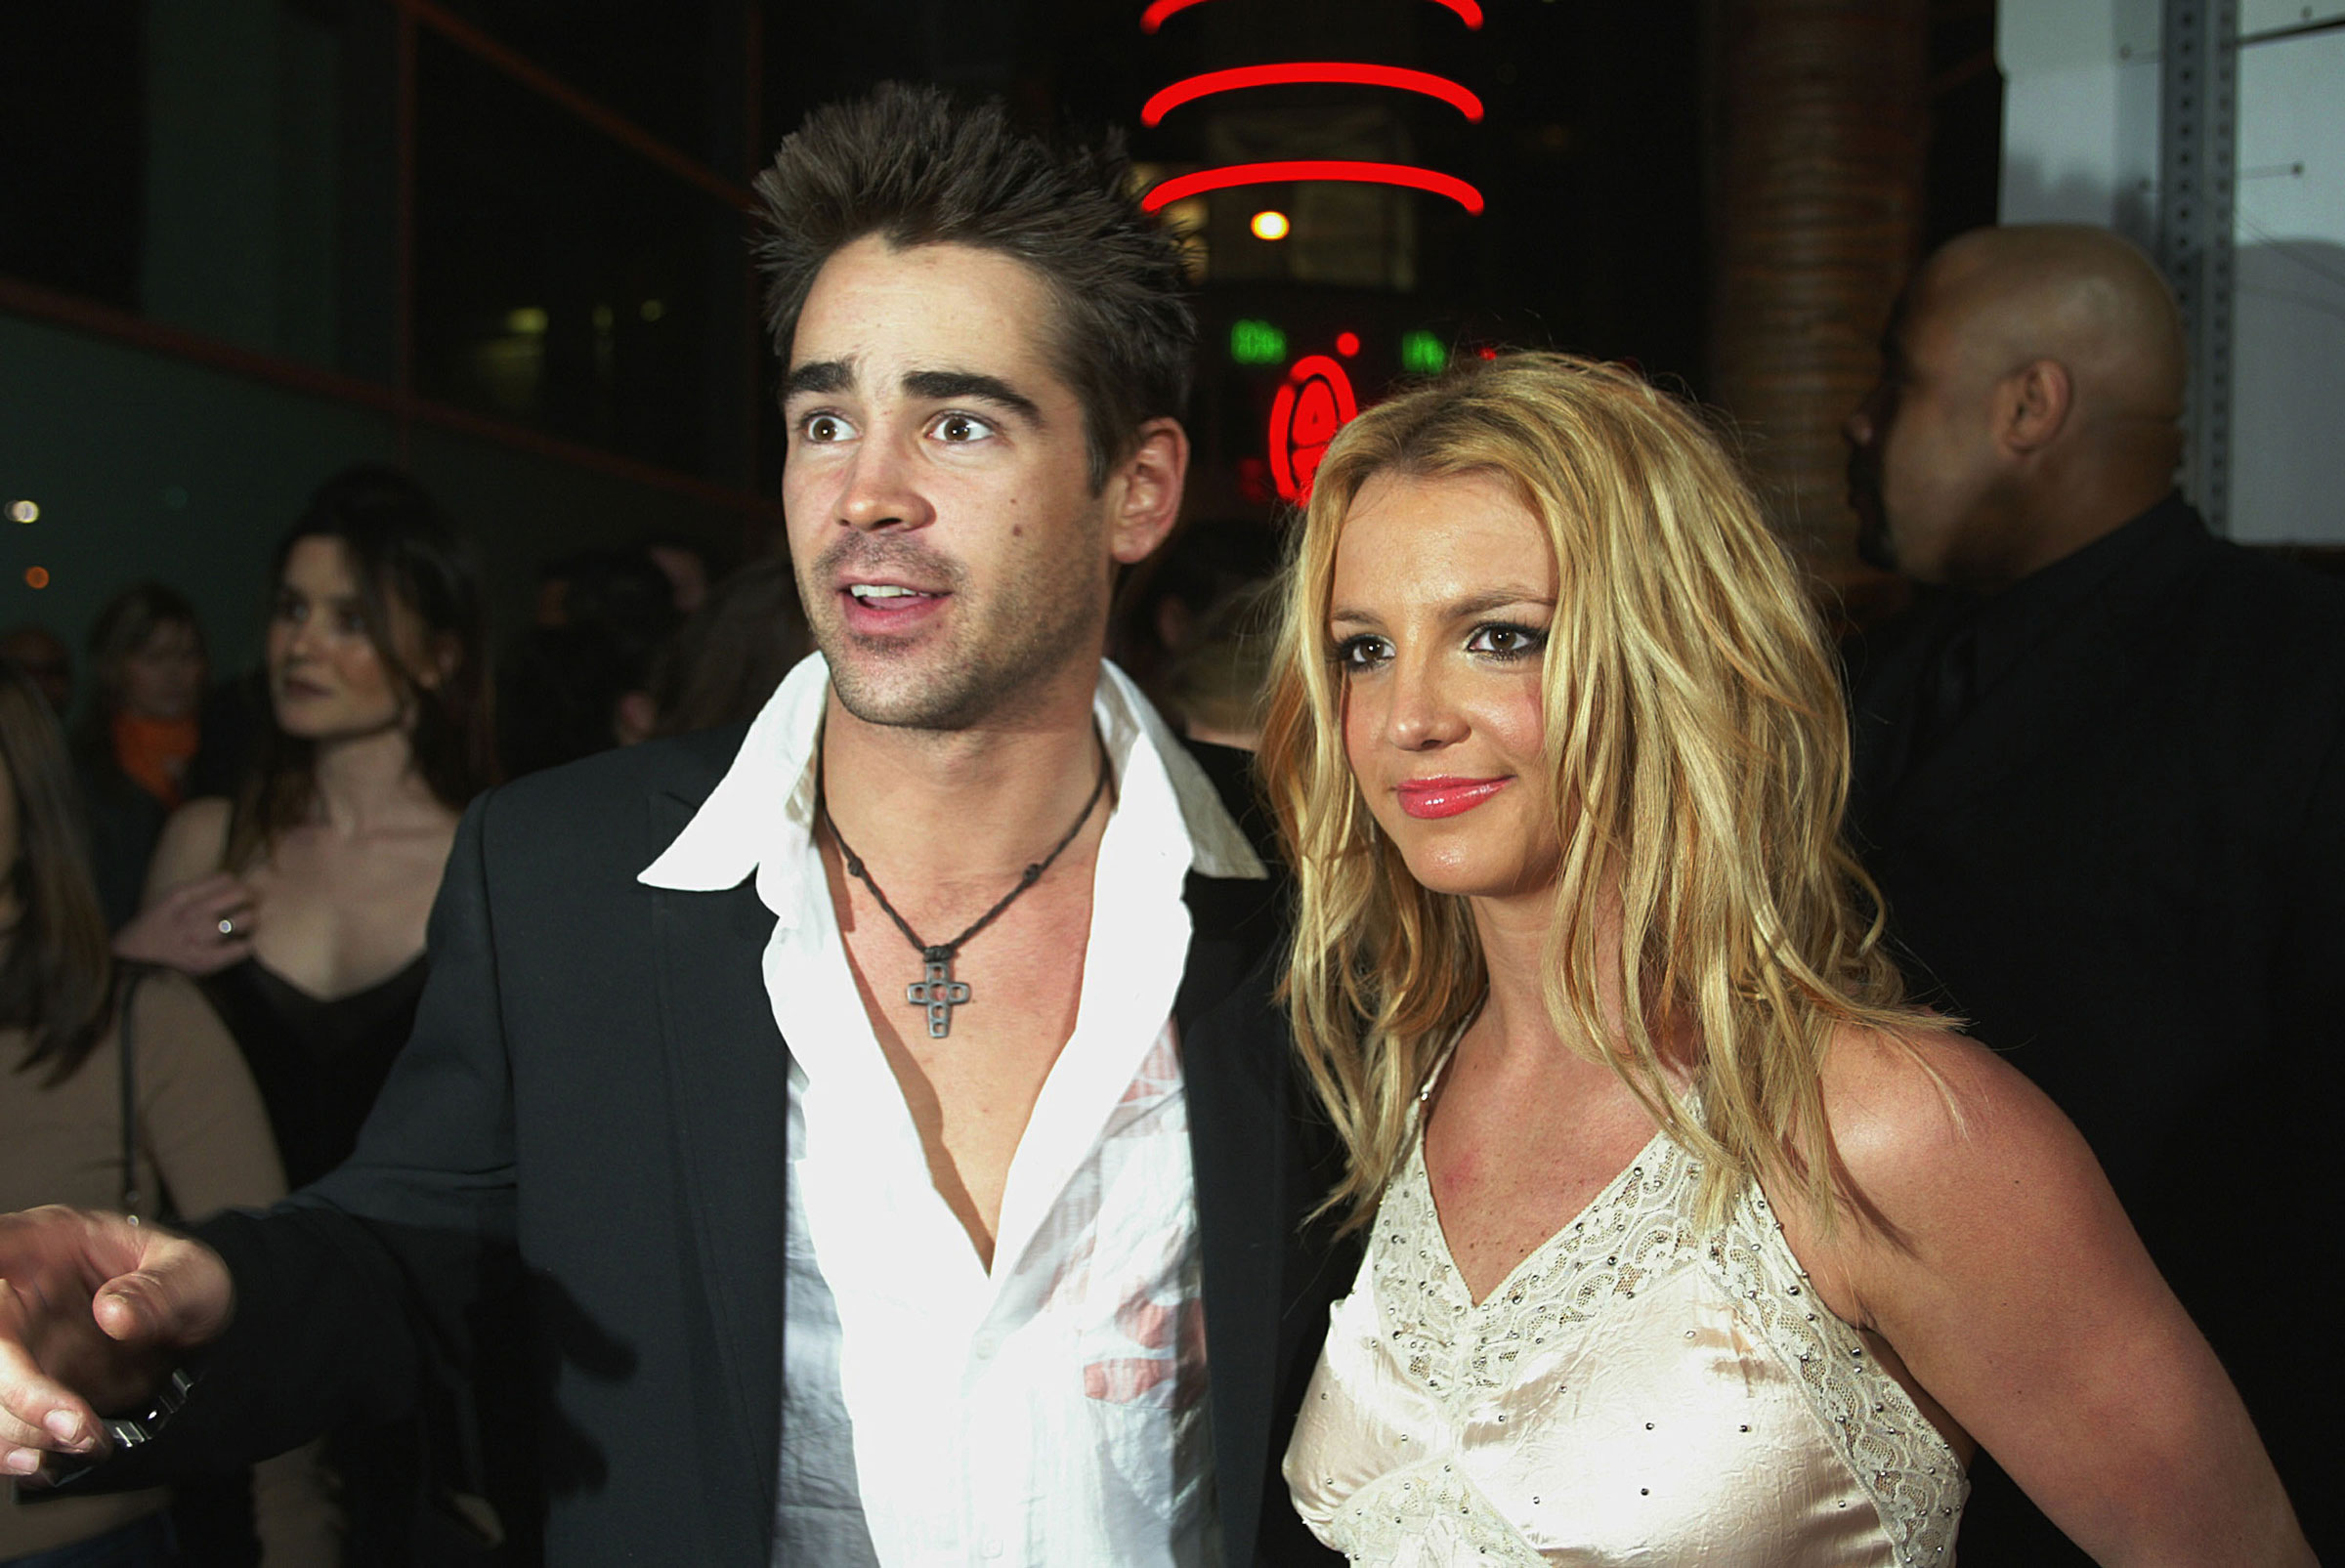 Singer Britney Spears and actor Colin Farrell